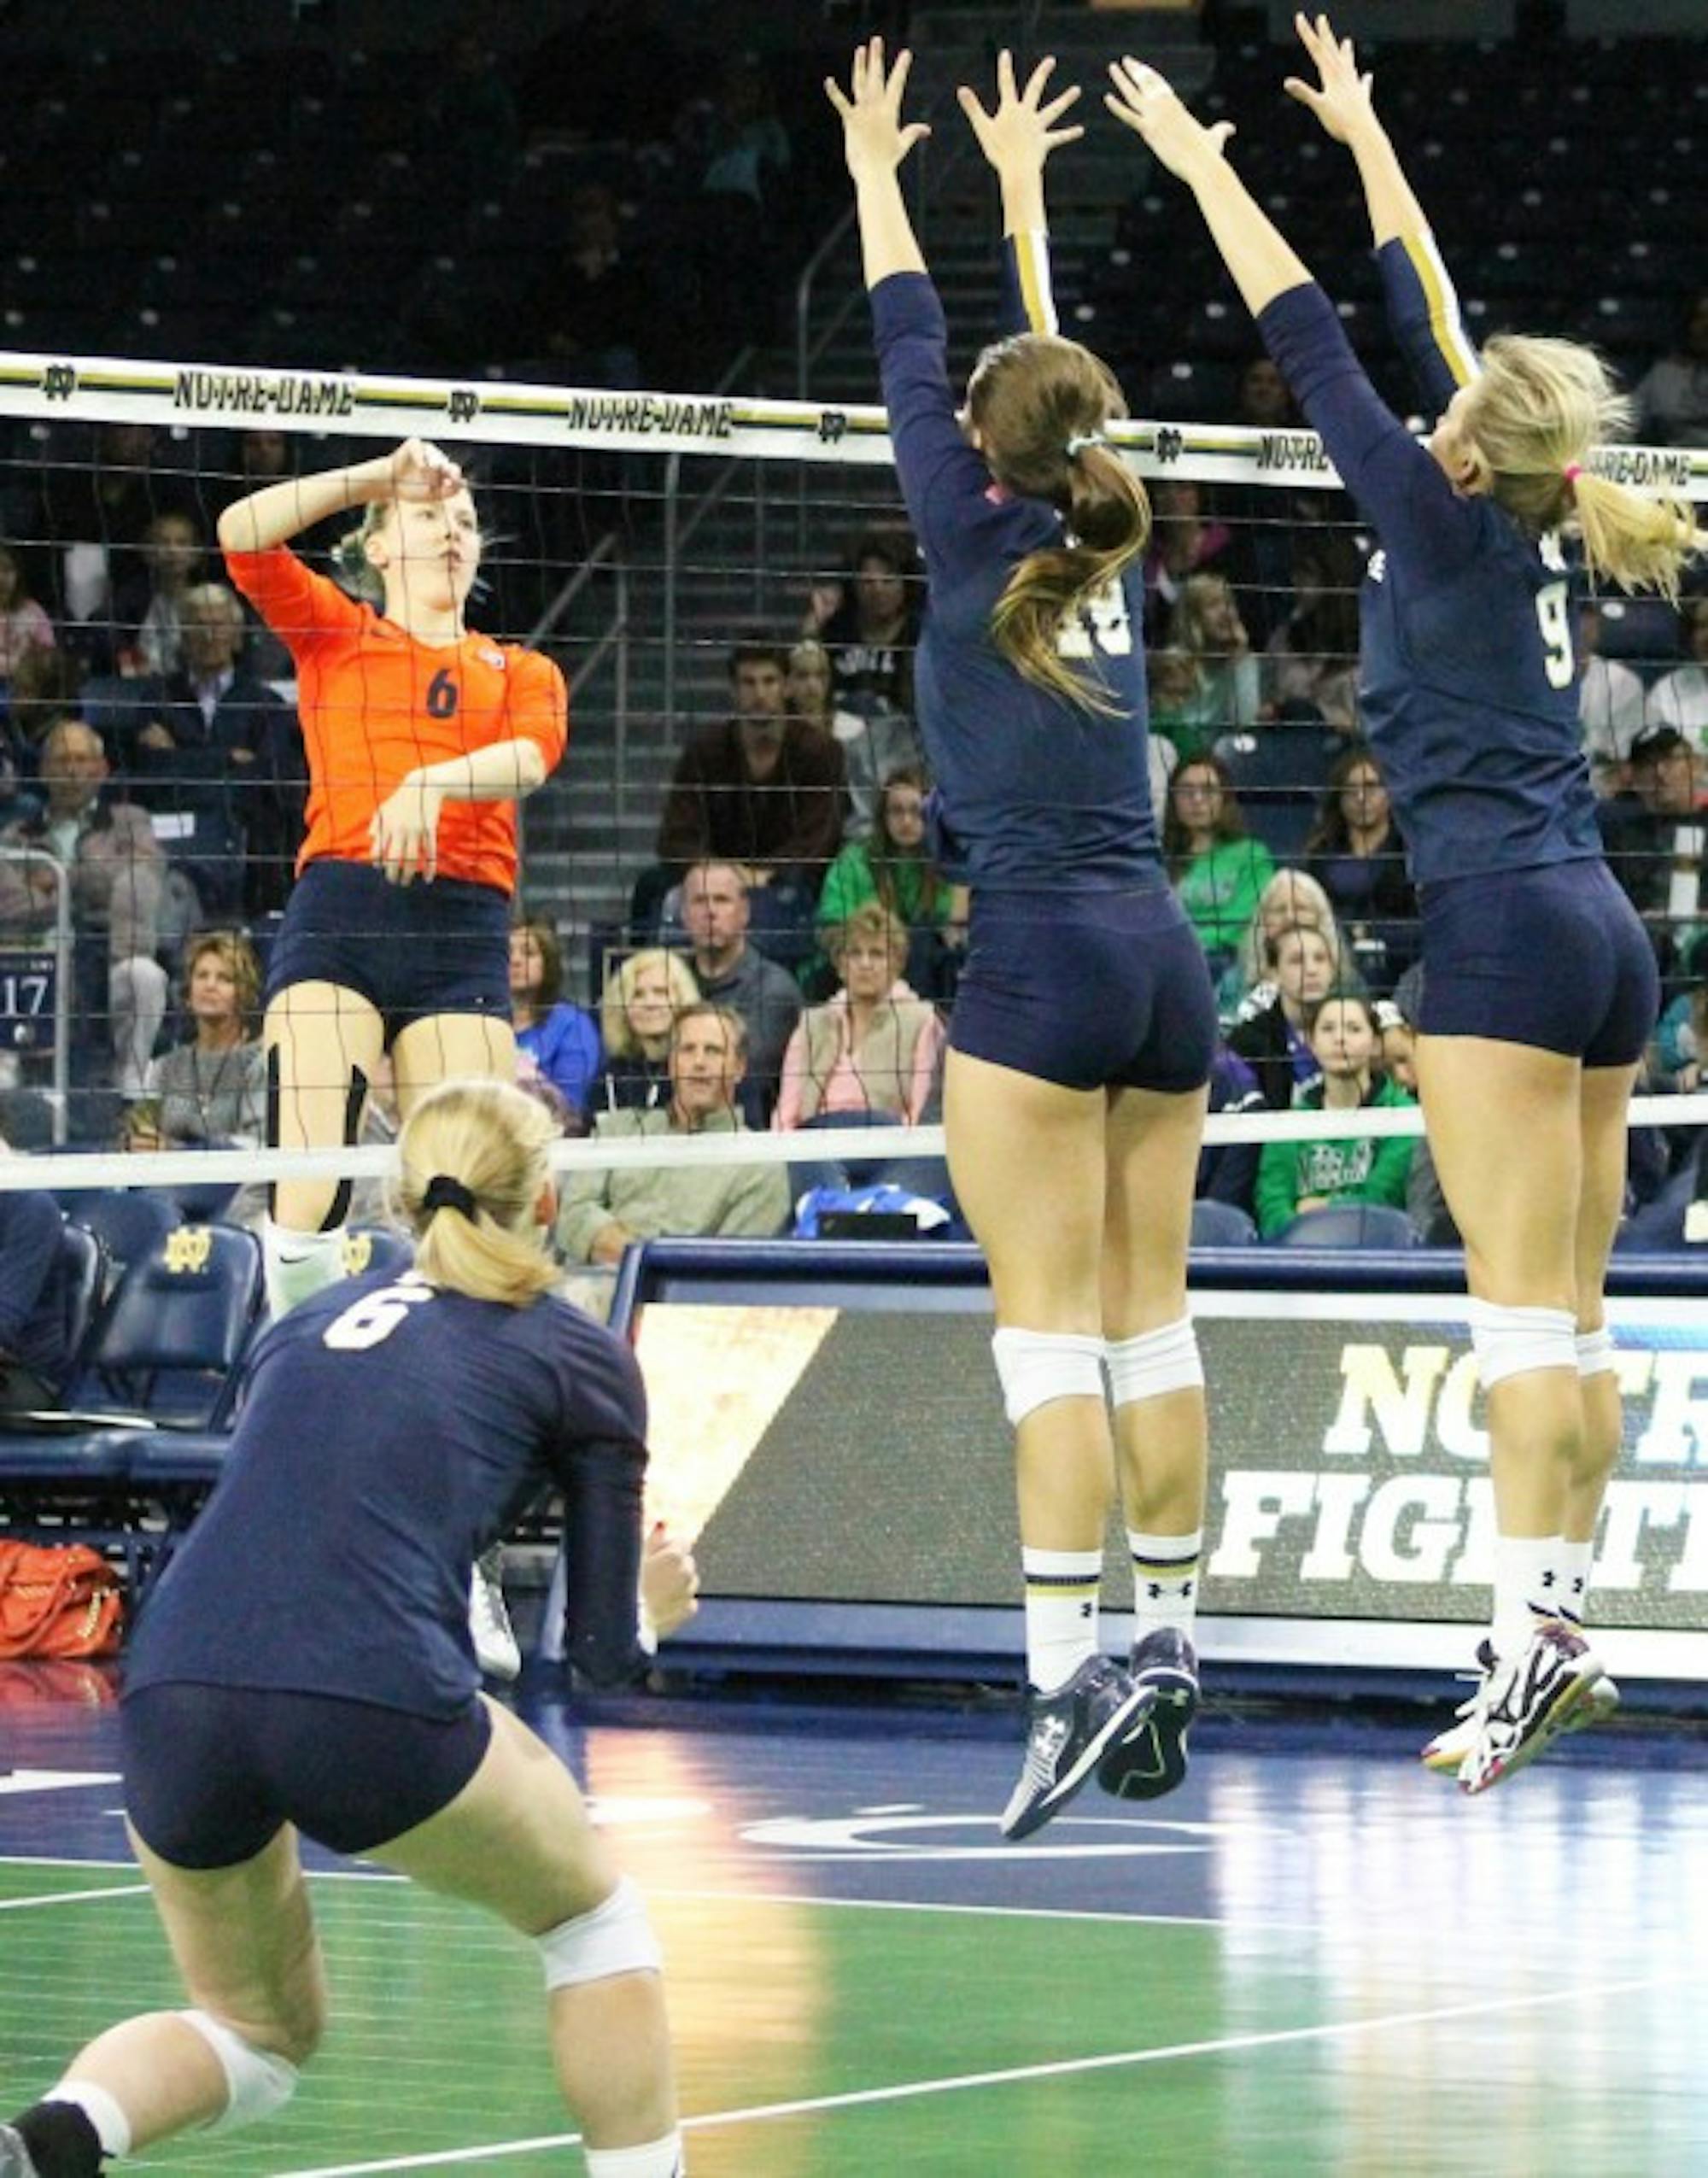 Irish middle blockers junior Katie Higgins, middle, and freshman Rebecca Nunge, right, attempt to block the ball during Notre Dame’s 3-2 loss to Syracuse on Oct. 4 at Purcell Pavilion.